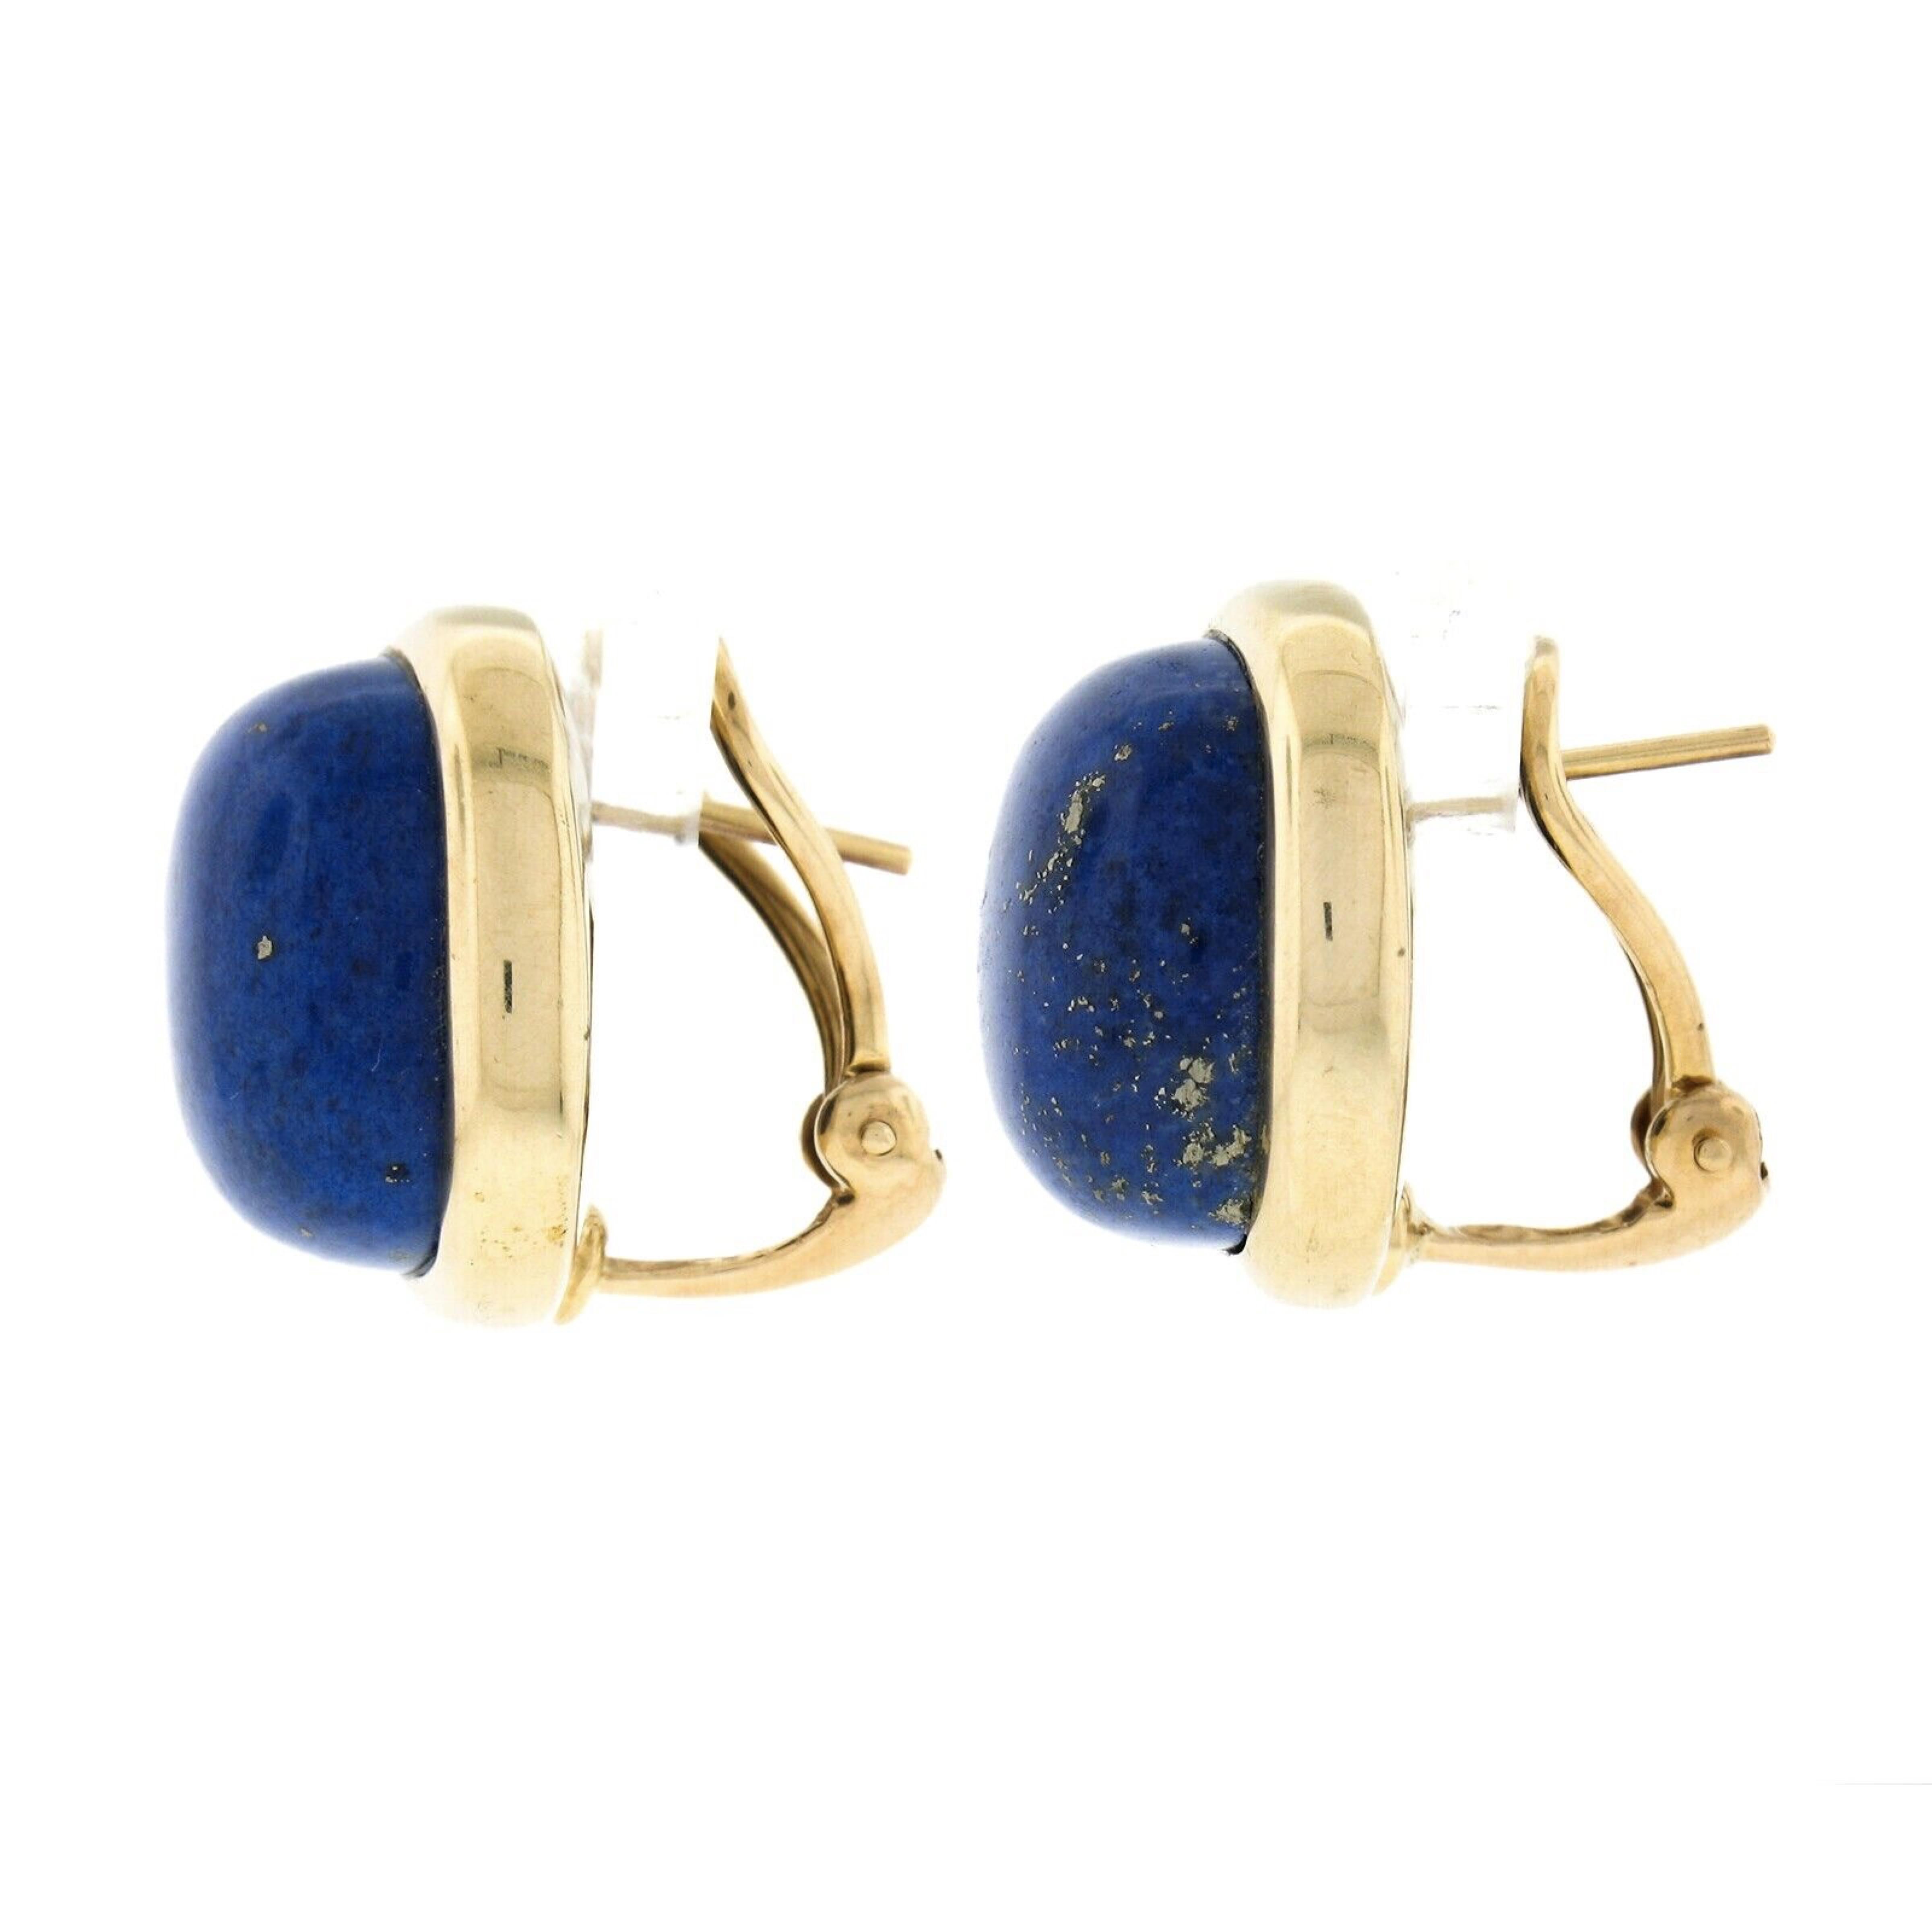 what pairs well with lapis lazuli